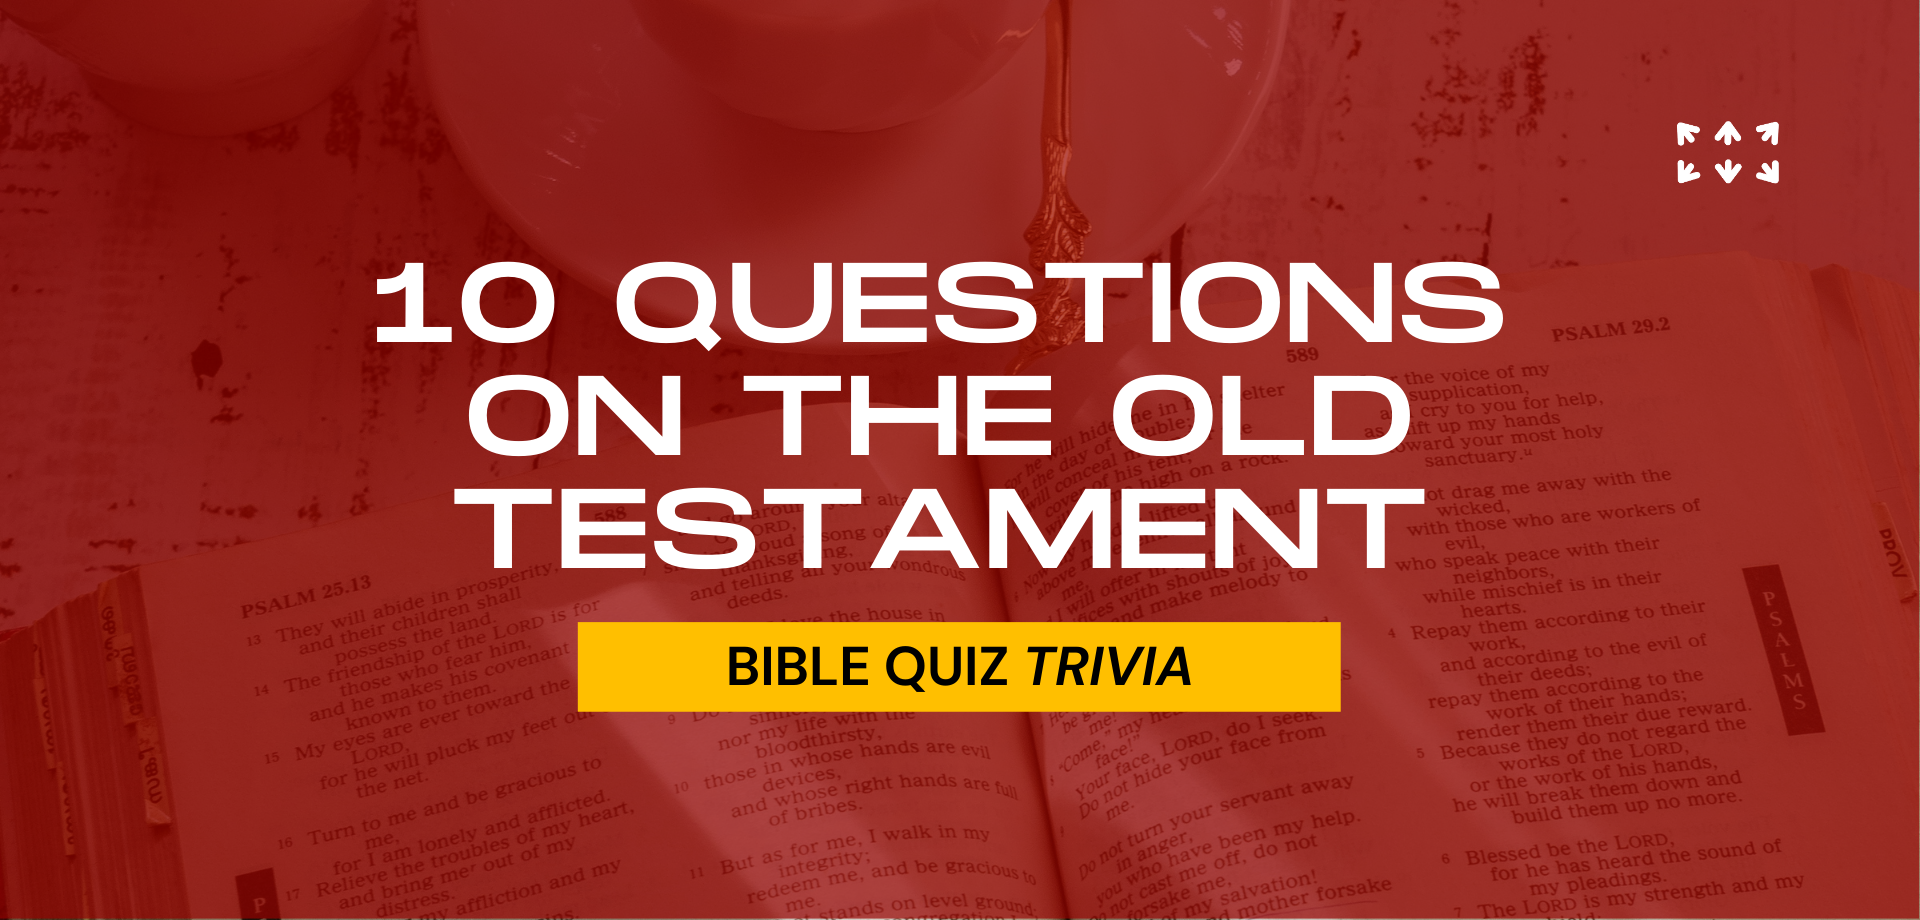 10 questions to test your knowledge of the Old Testament